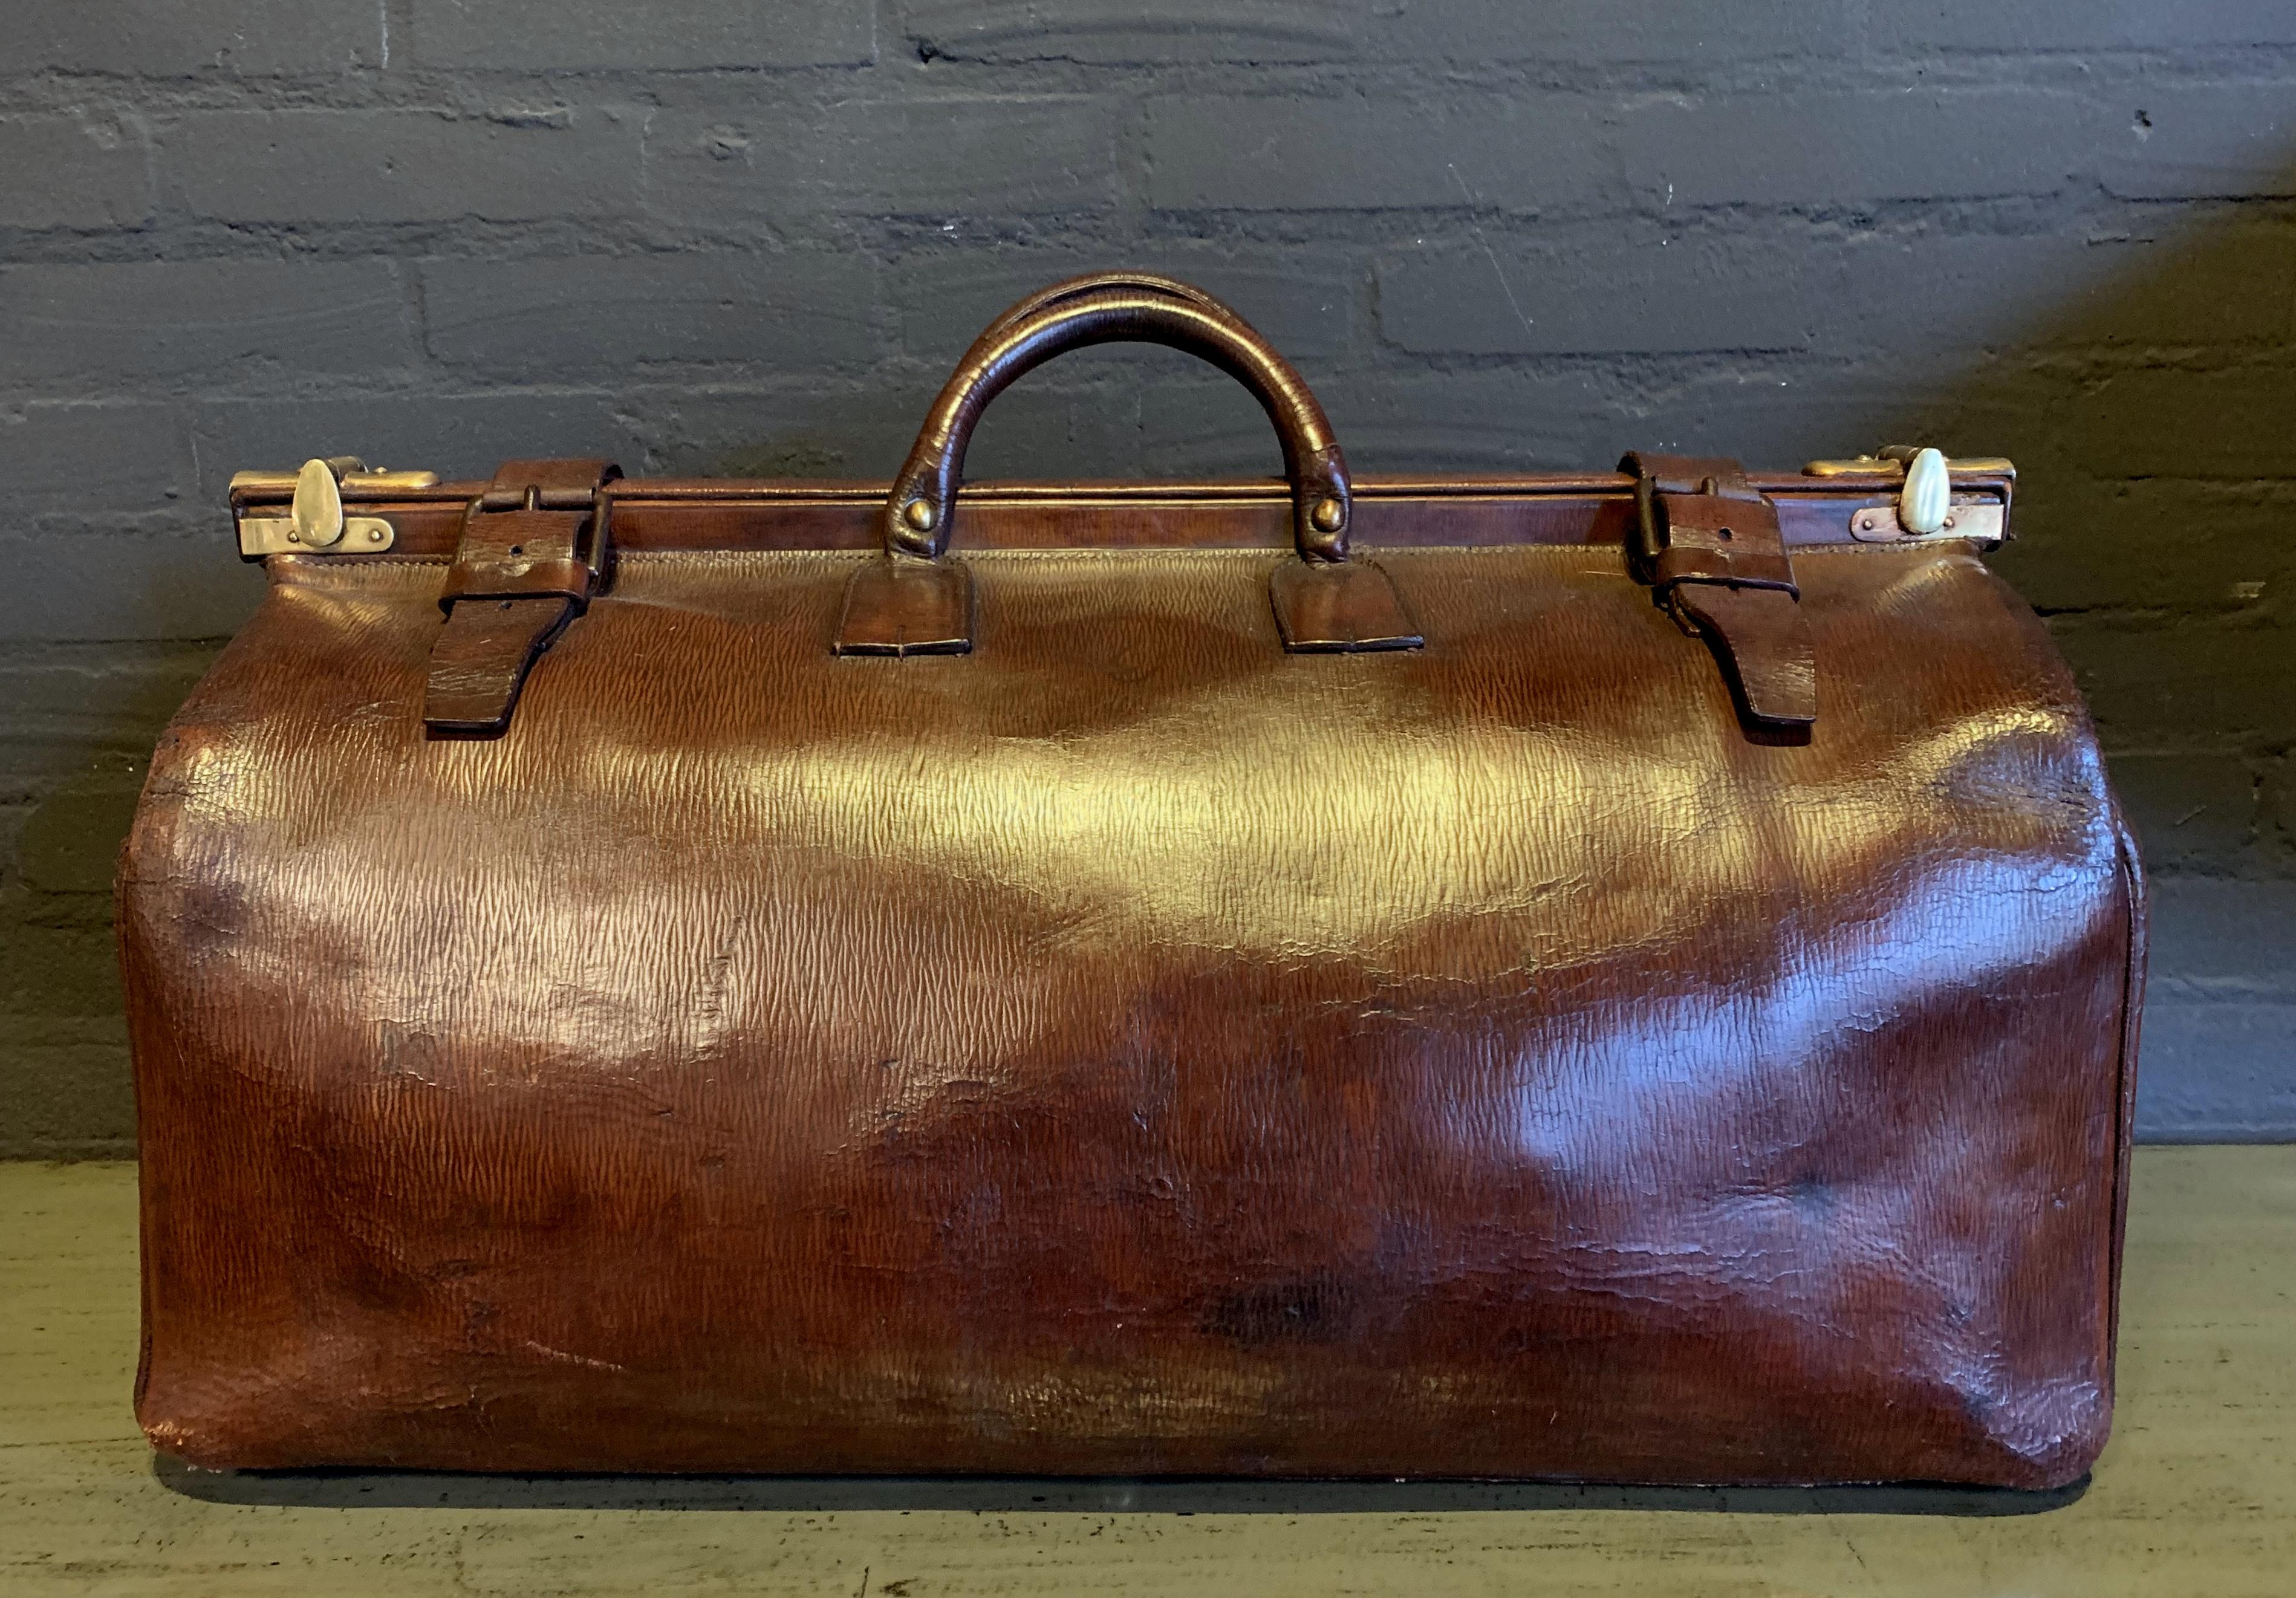 Beautiful leather gladstone bag named after a former UK prime minister.
The bag has the original handle, buckles and secure locks. It has a wonderful patina throughout.
Very good condition, even the bottom of the bag is in a superb condition.